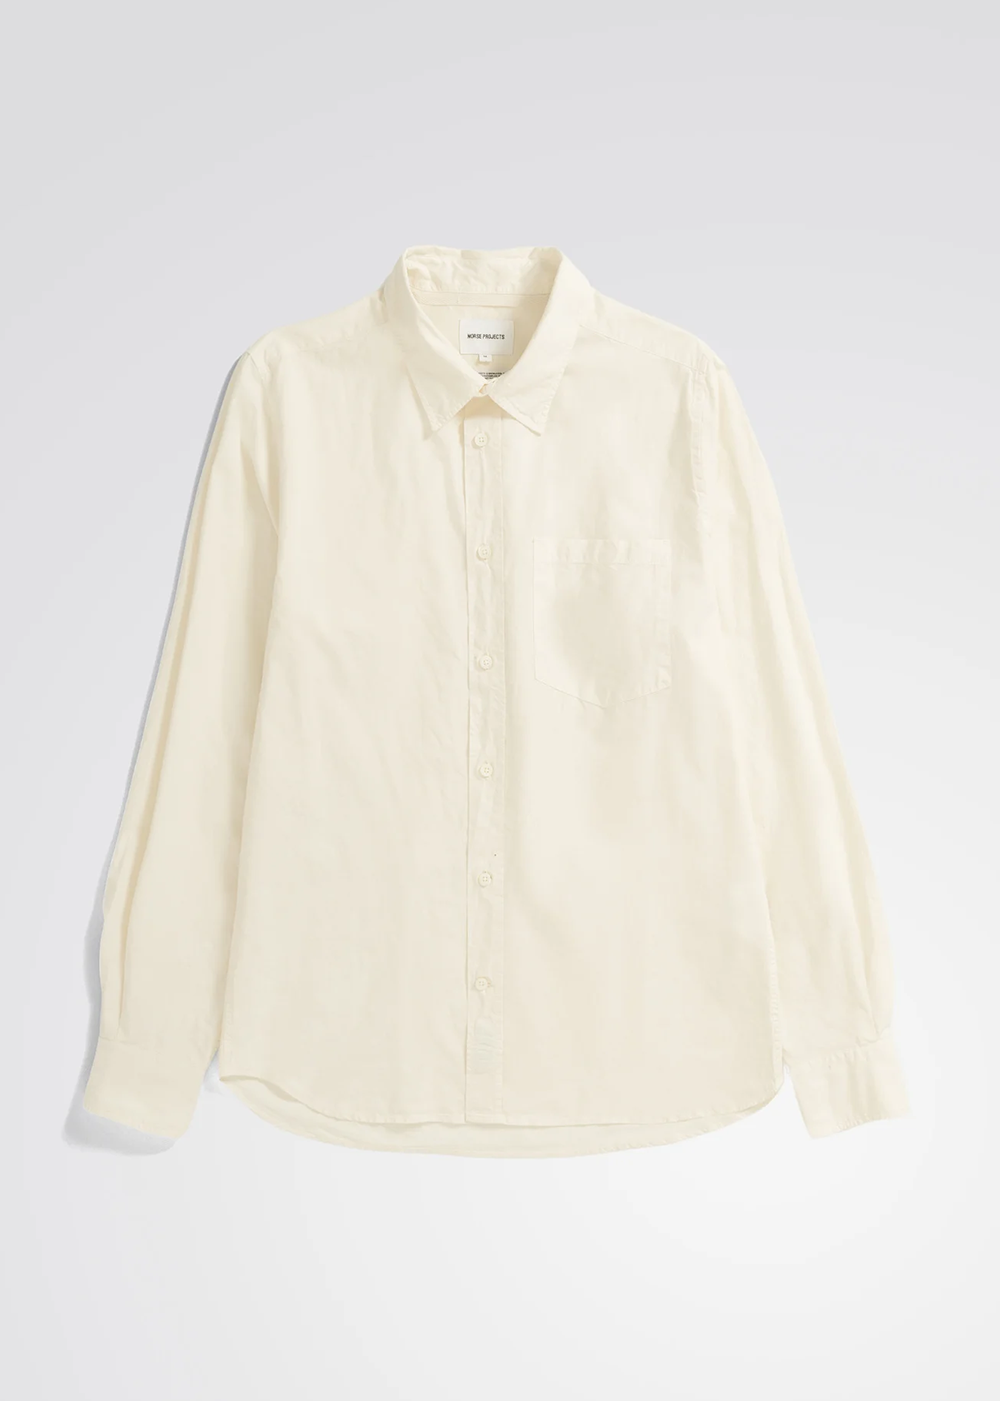 White Cotton Button Down Shirt from Norse Projects